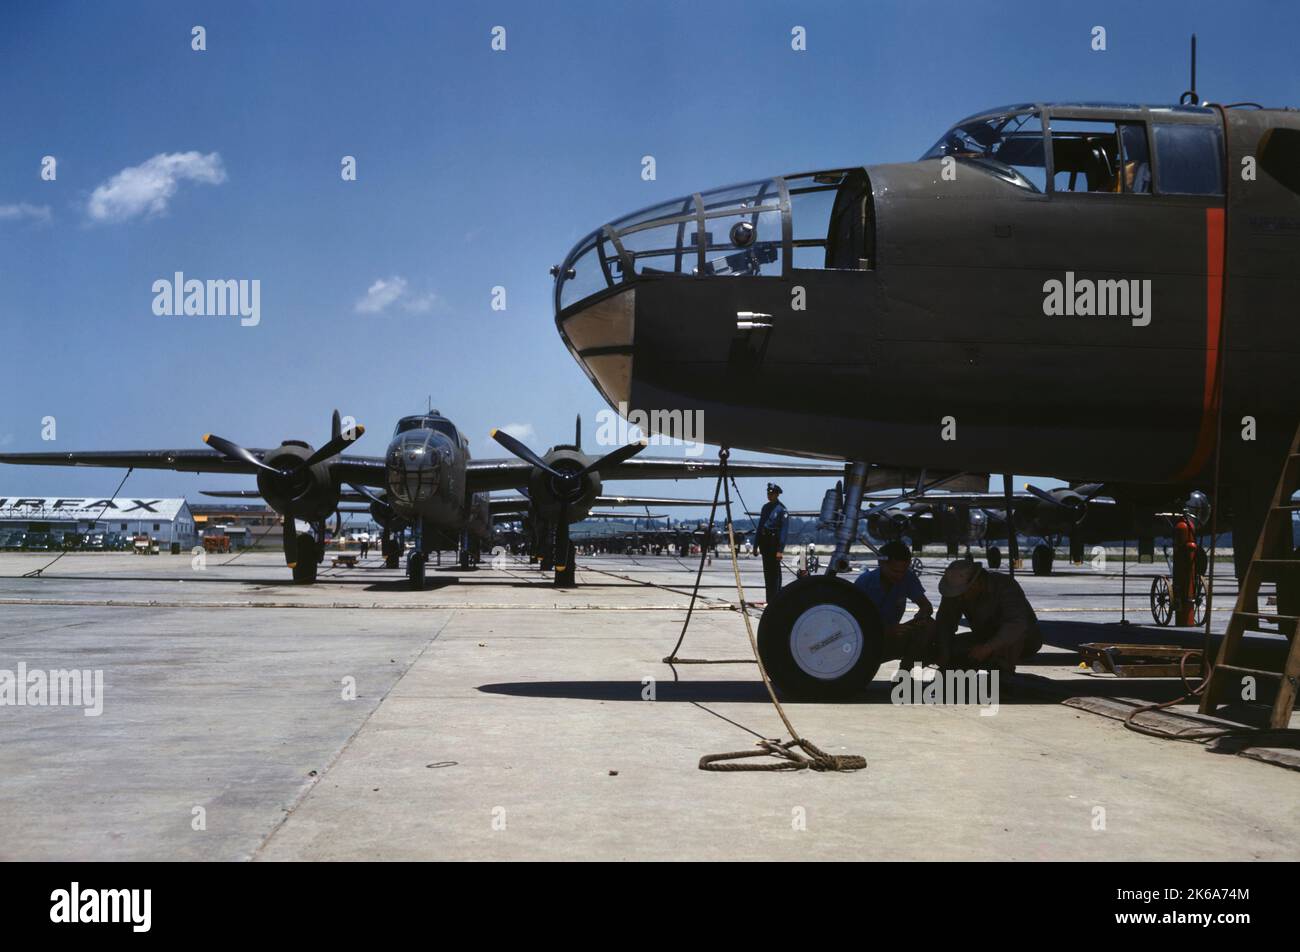 B-25 bombers awaiting final inspection and tests during World War II, 1942. Stock Photo